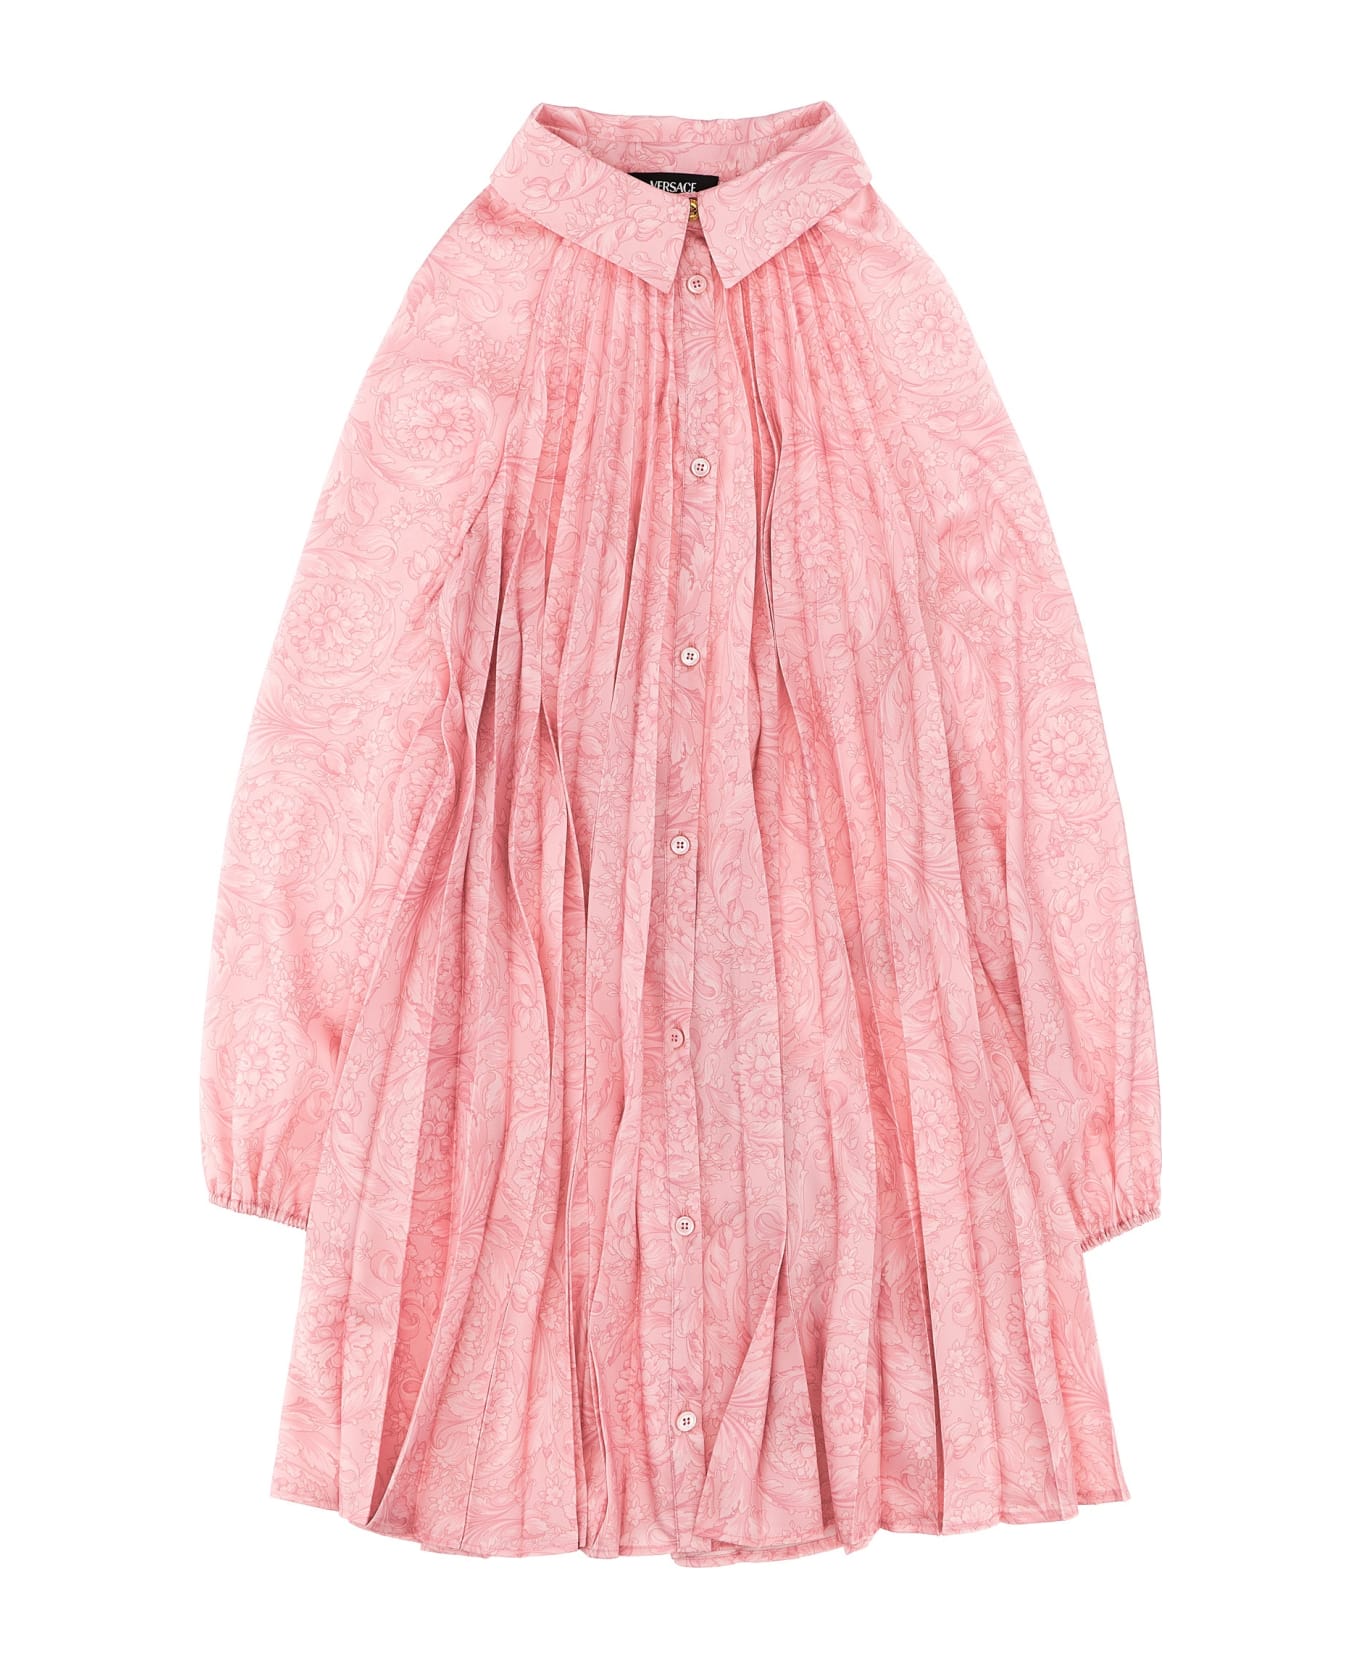 Versace Pleated Dress - Pink